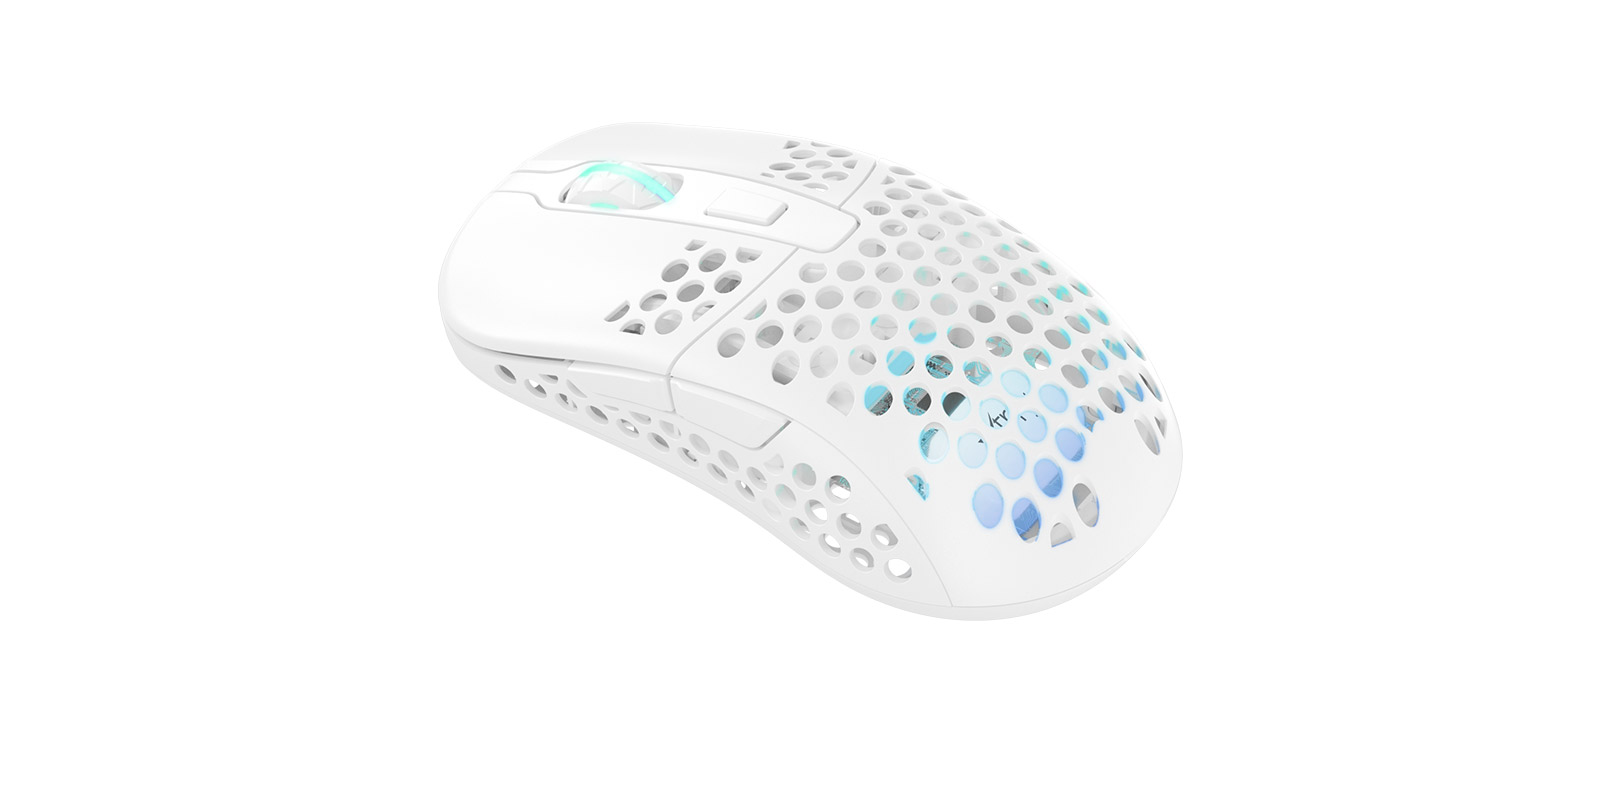 M42-Wireless-White-Gaming-Mouse_gallery02.jpg